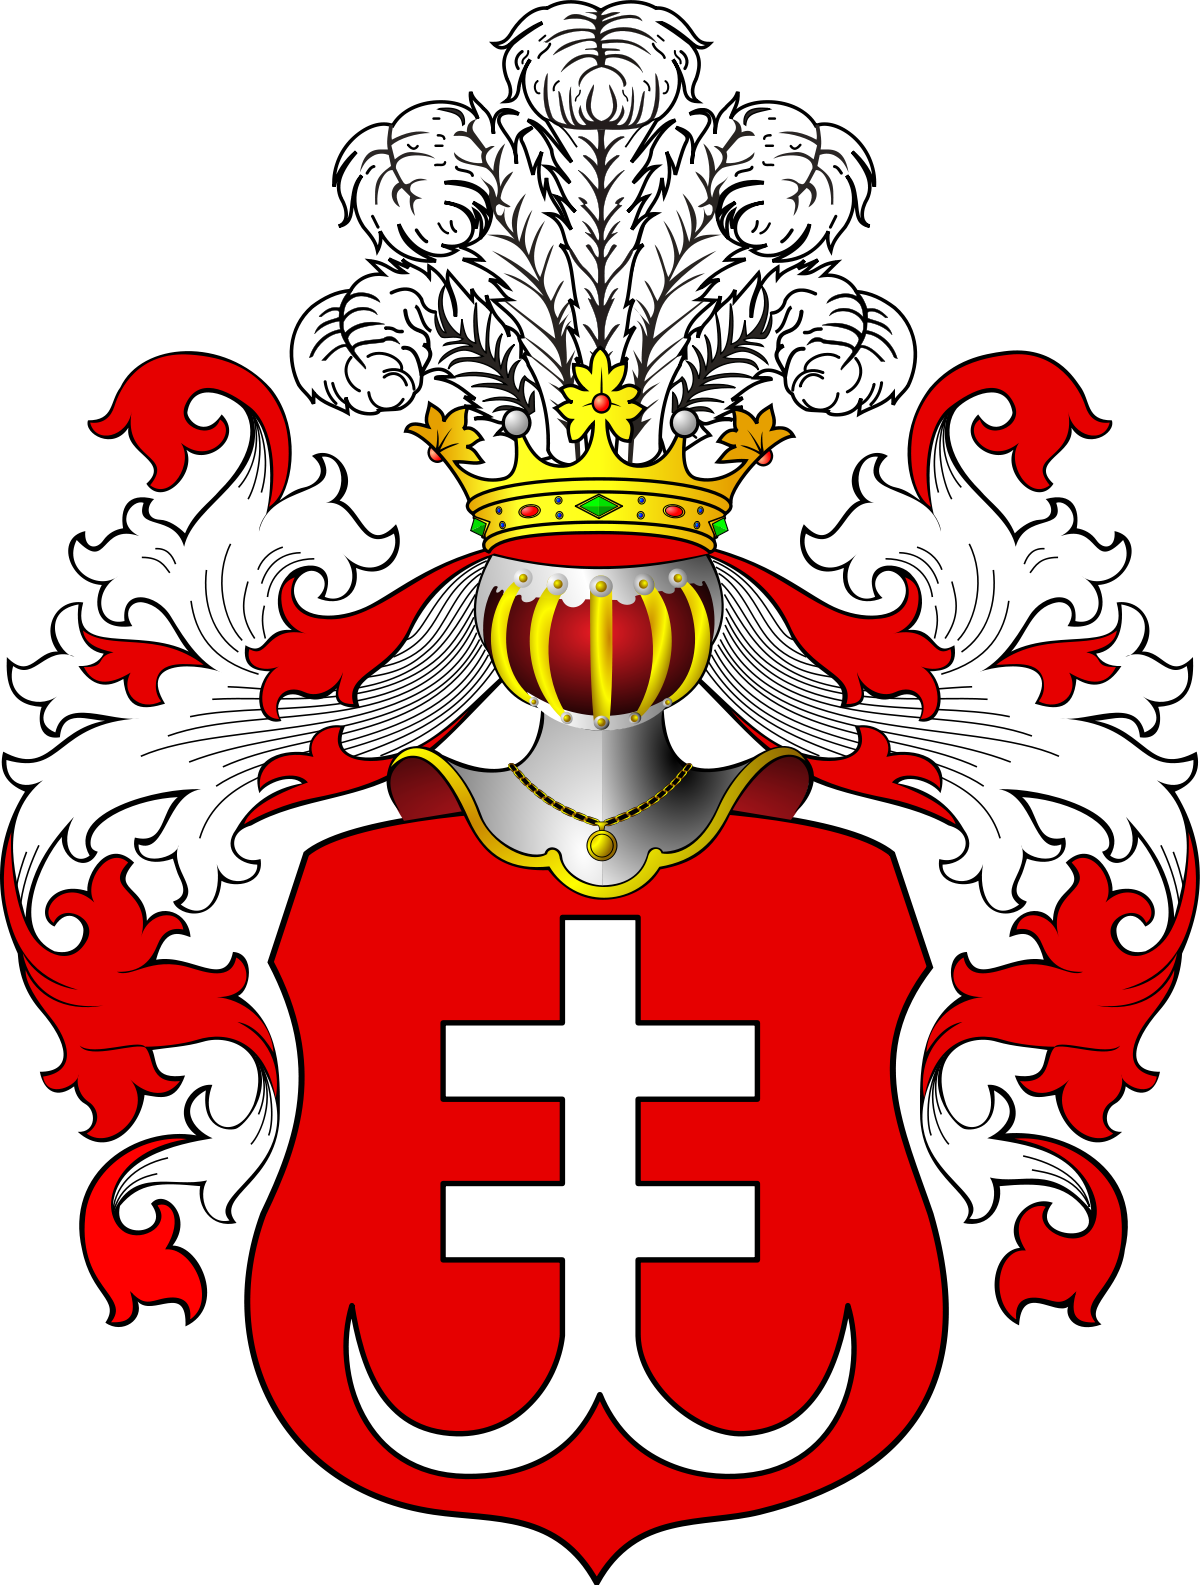 Juńczyk coat of arms - Wikipedia